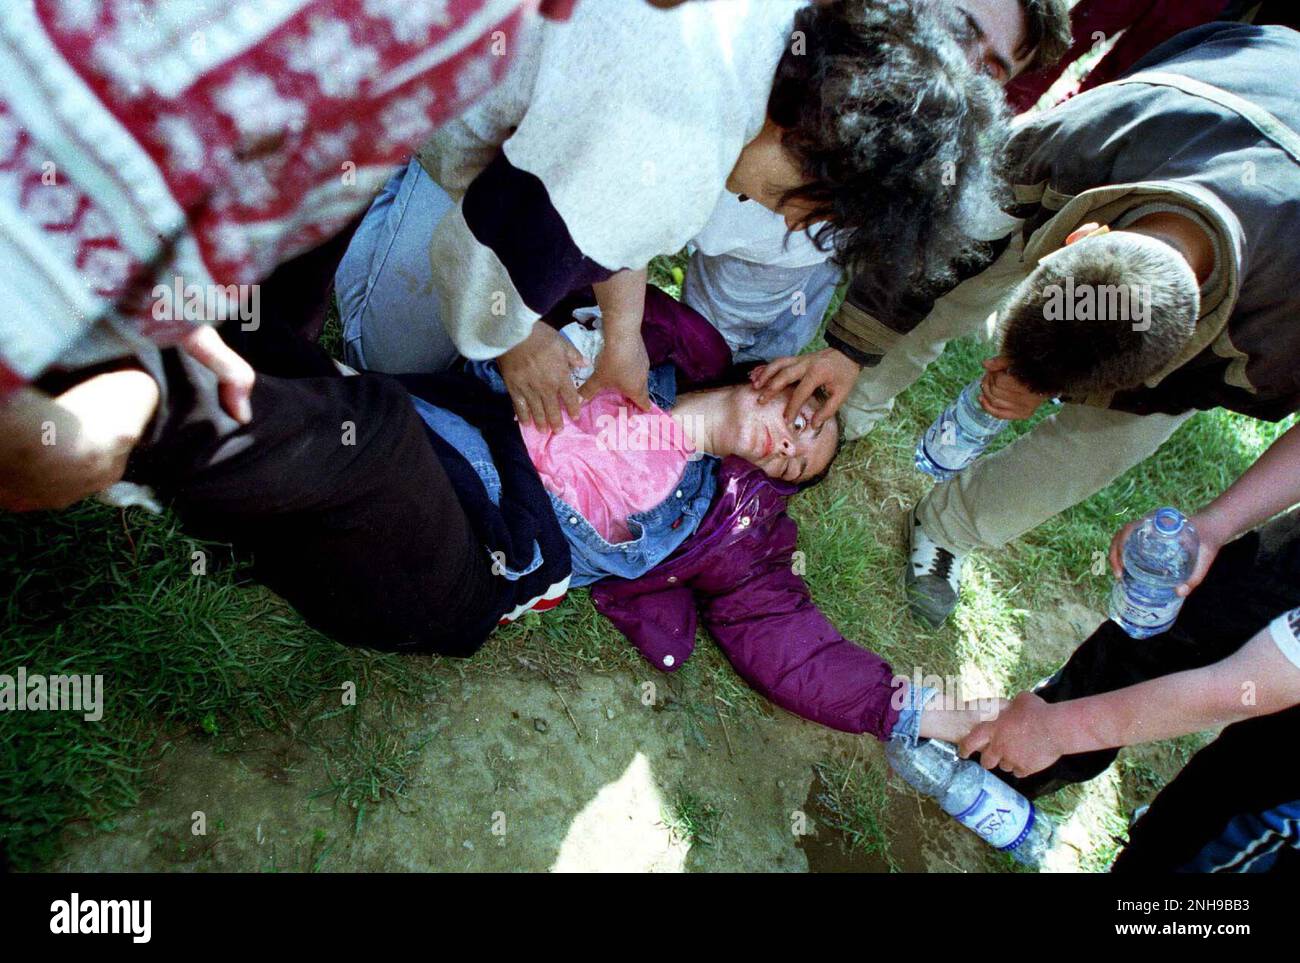 Woman refugee faints in heat having arrived in Northern Macedonia via bus from the boarder crossing. Brazda refugee camp in Macedonia April 1999. The camp was run by NATO but  turned over  to UNHCR. Macedonia. Picture garyrobertsphotography.com Stock Photo